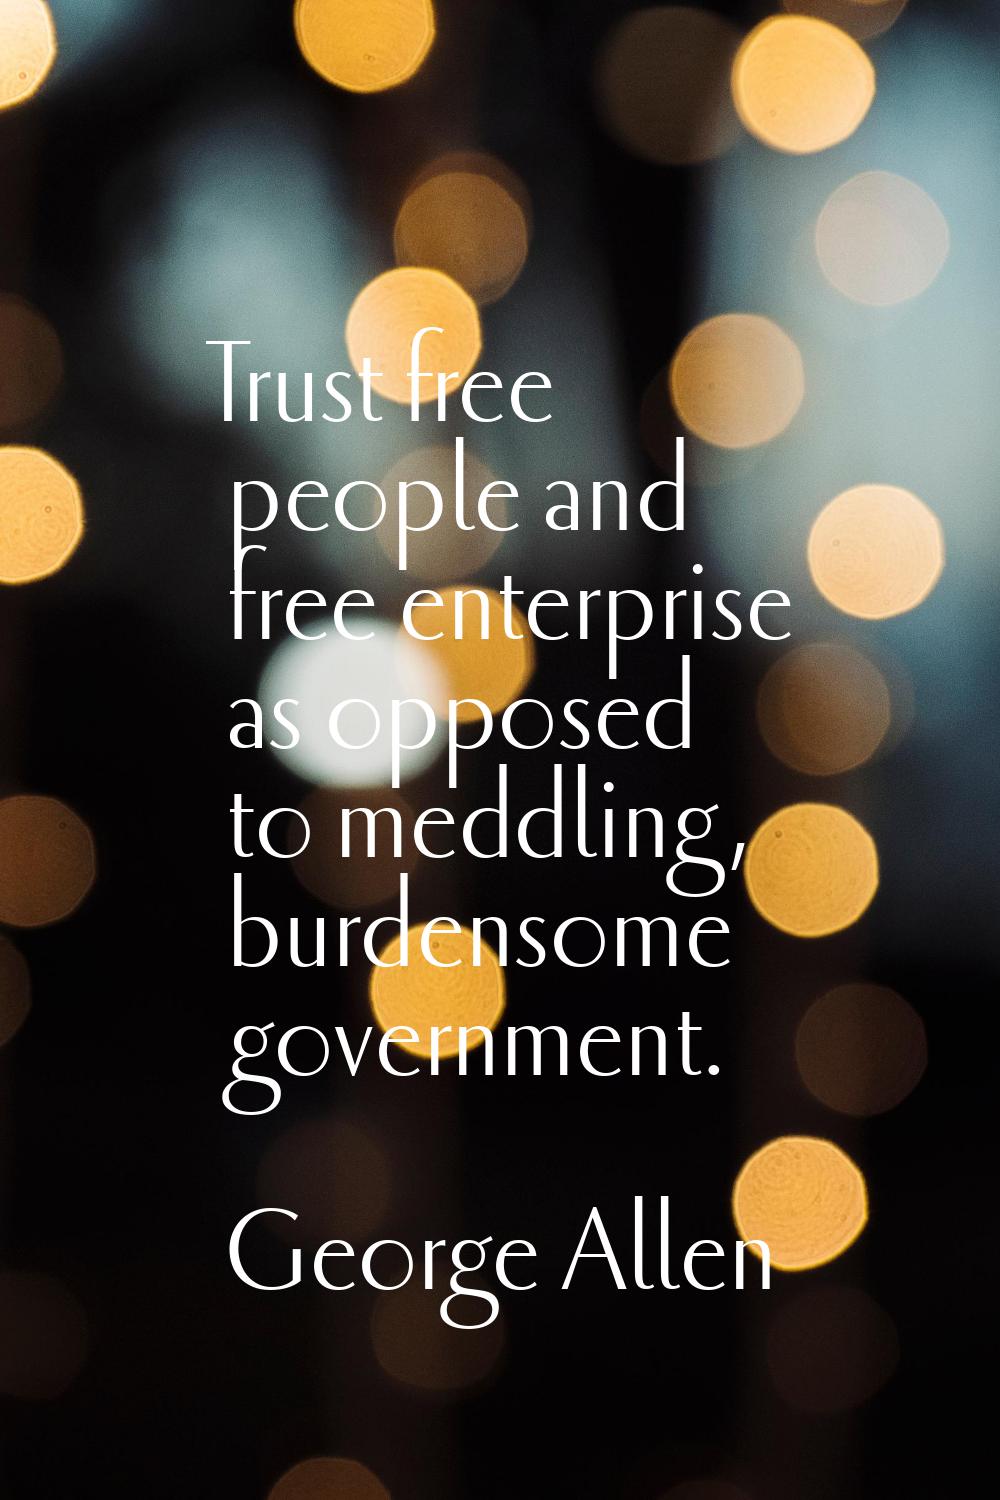 Trust free people and free enterprise as opposed to meddling, burdensome government.